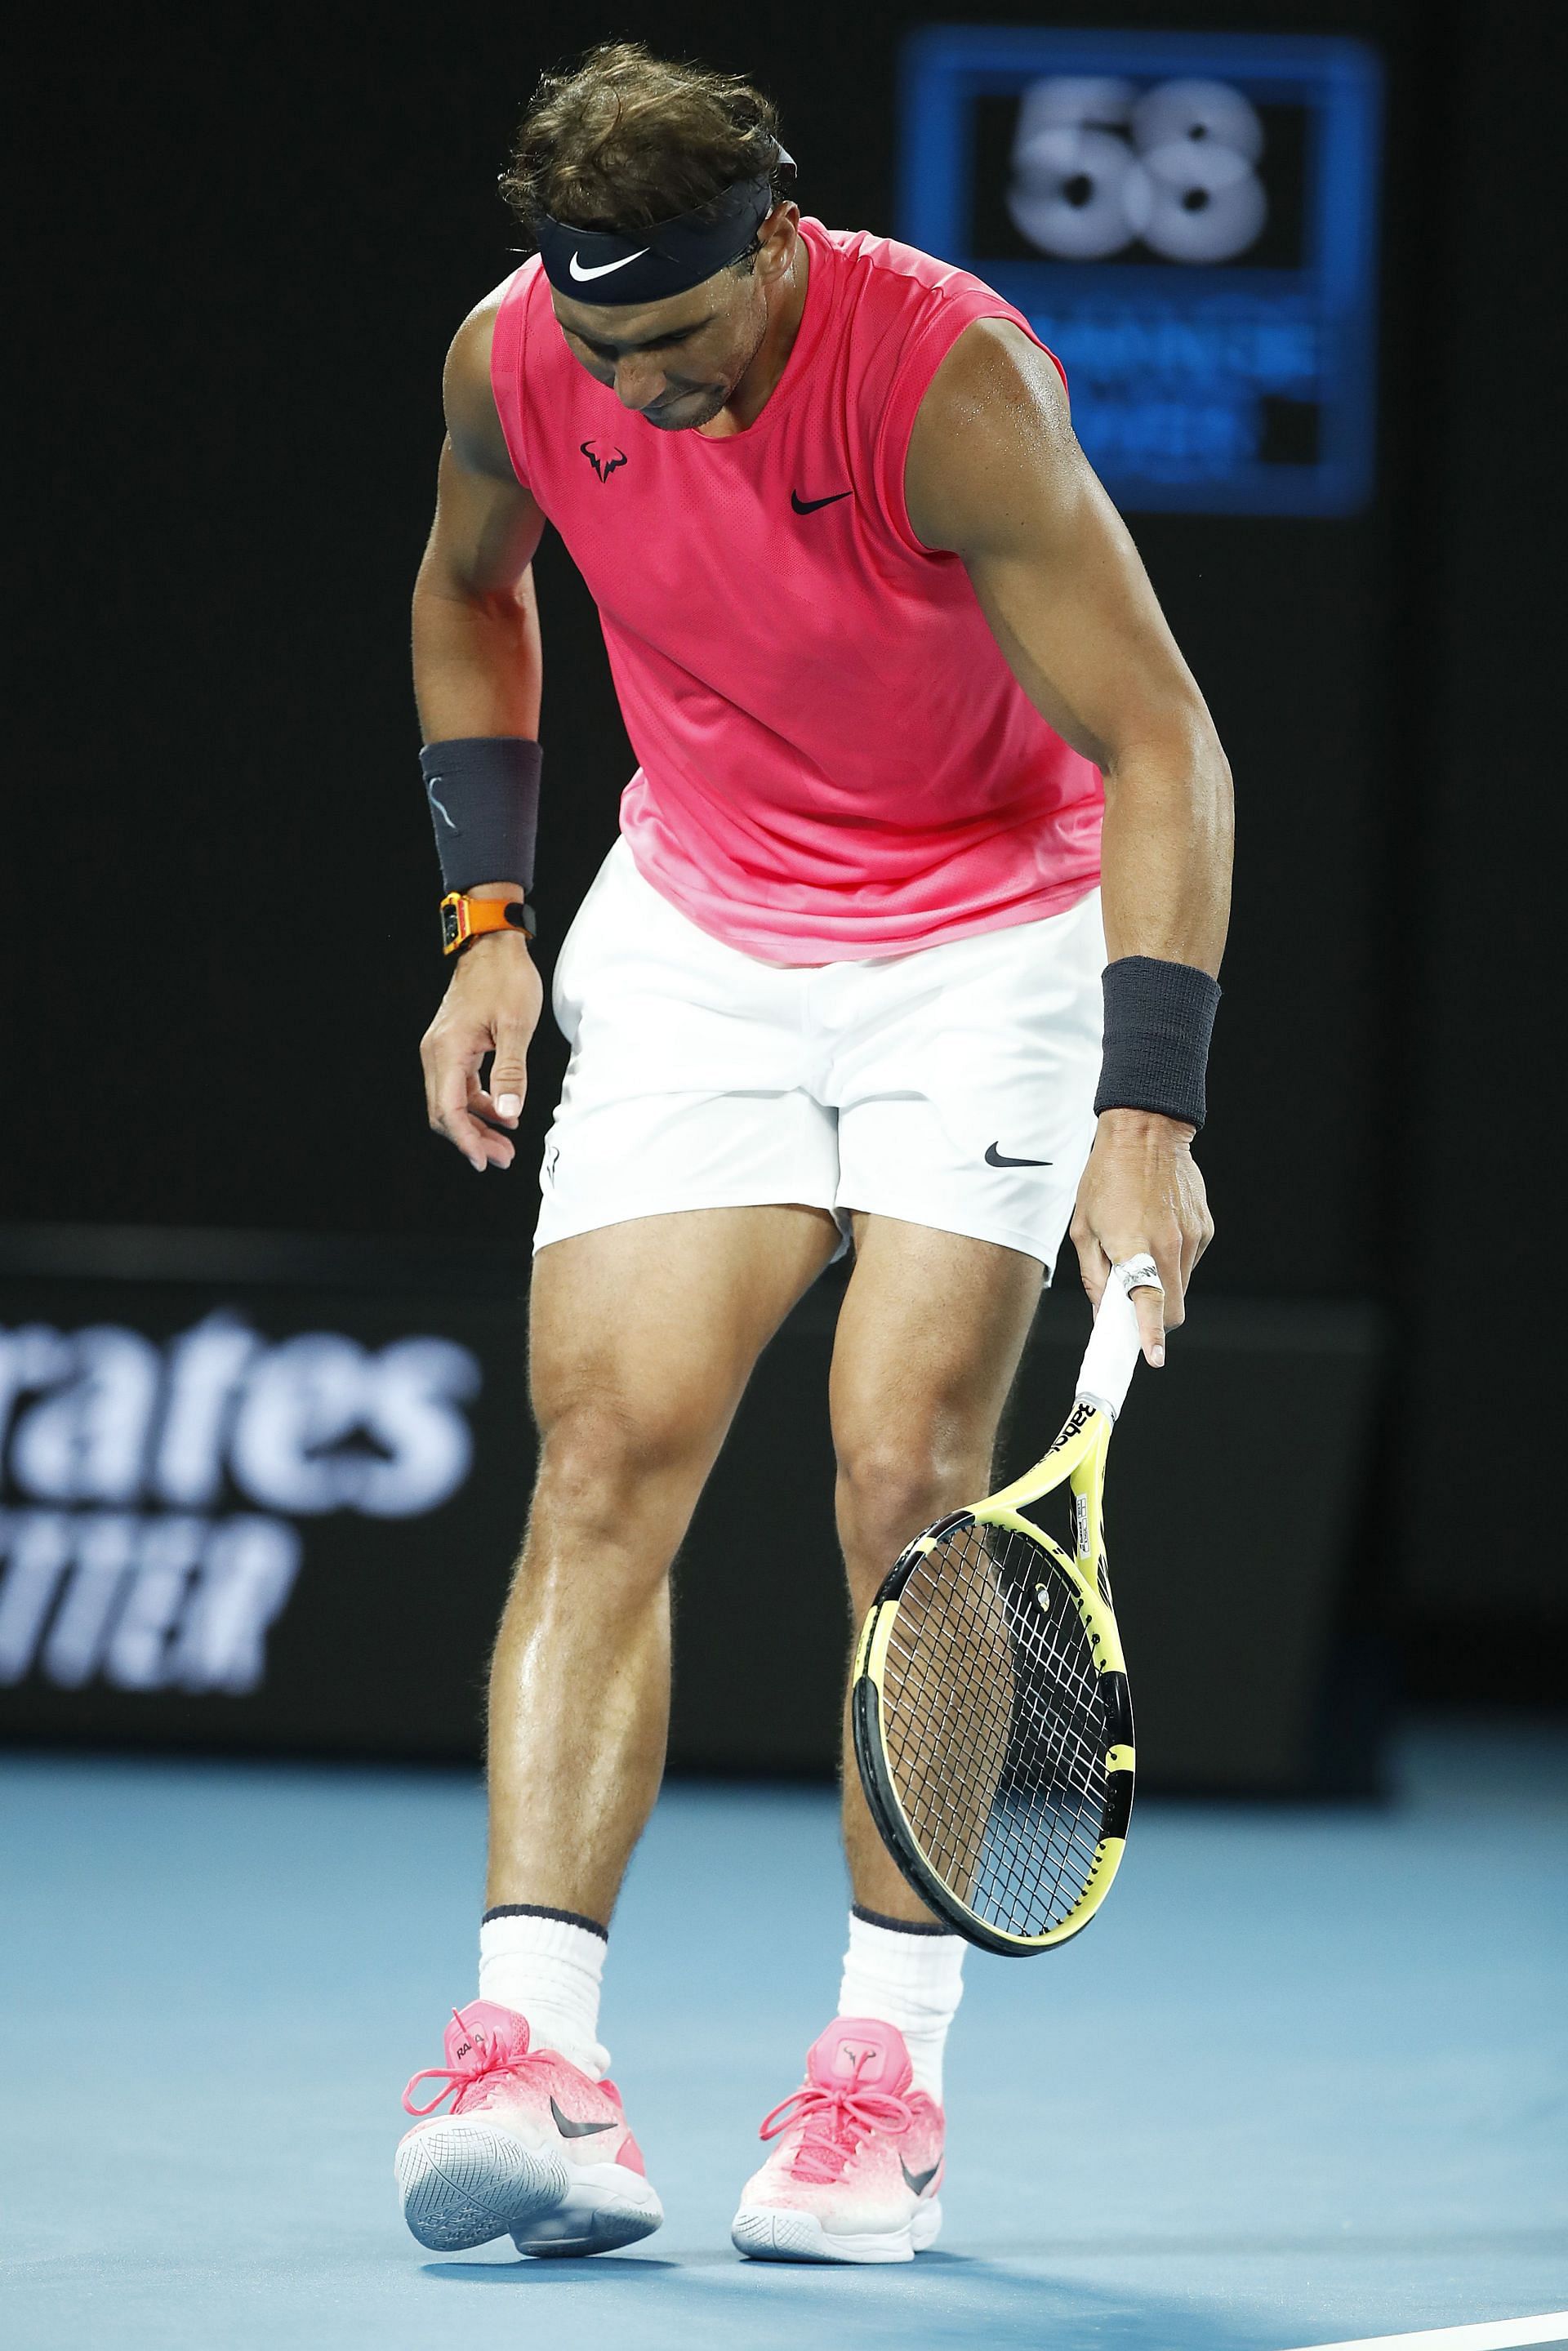 Rafael Nadal reacts after hurting his foot at the 2020 Australian open